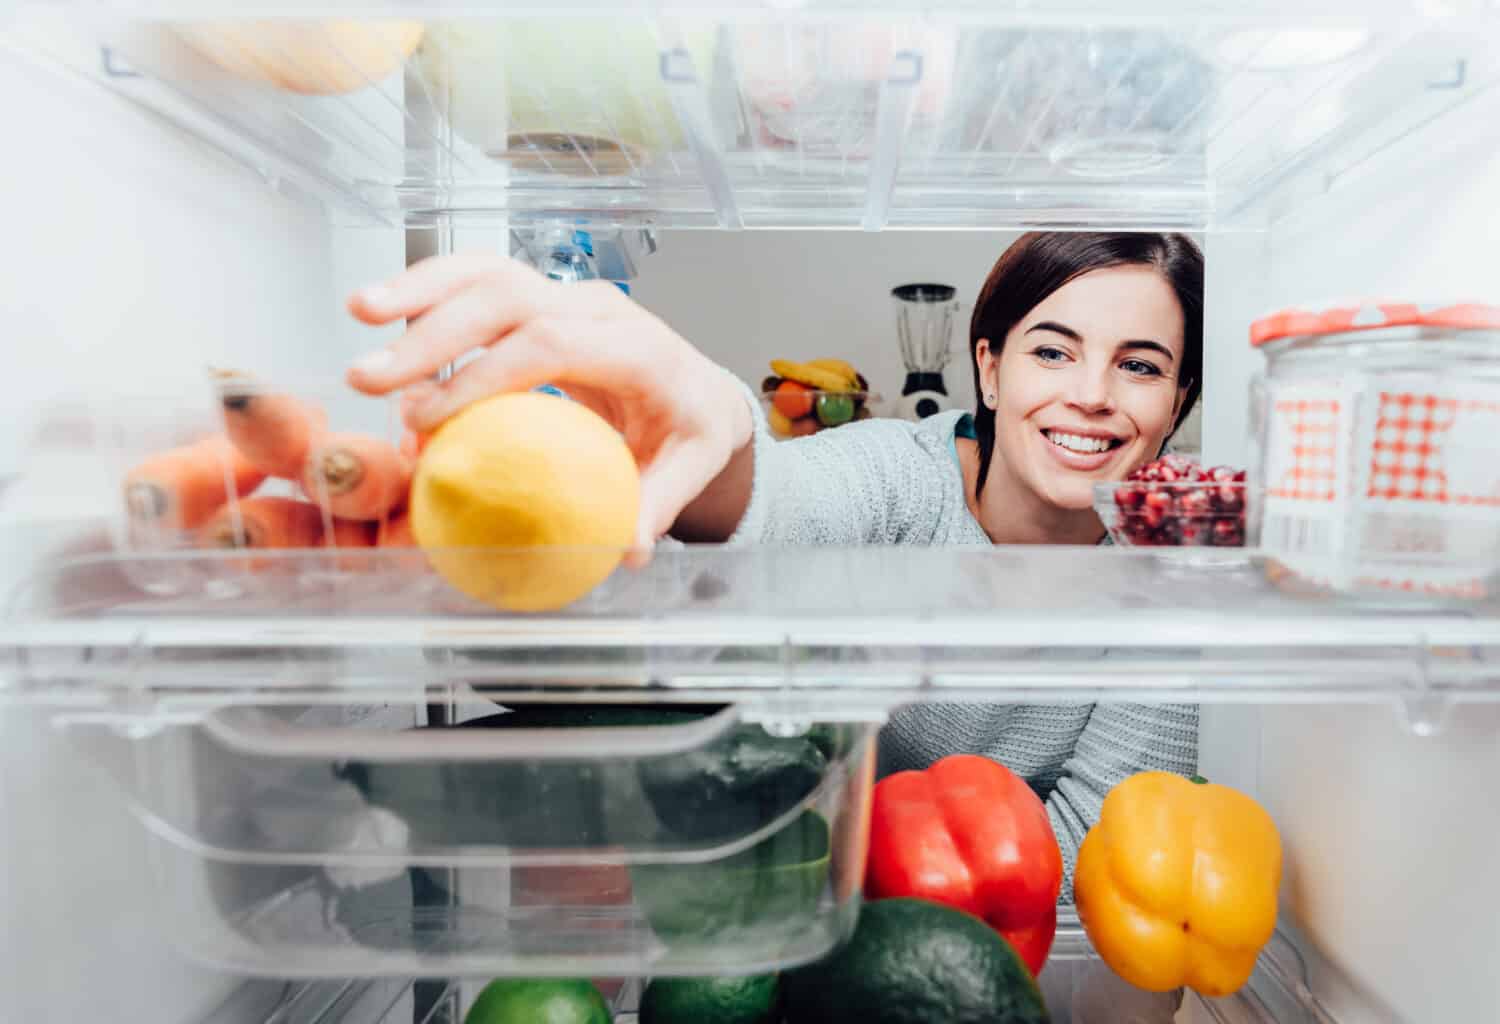 Smiling woman taking a fresh lemon out of the fridge, healthy food concept